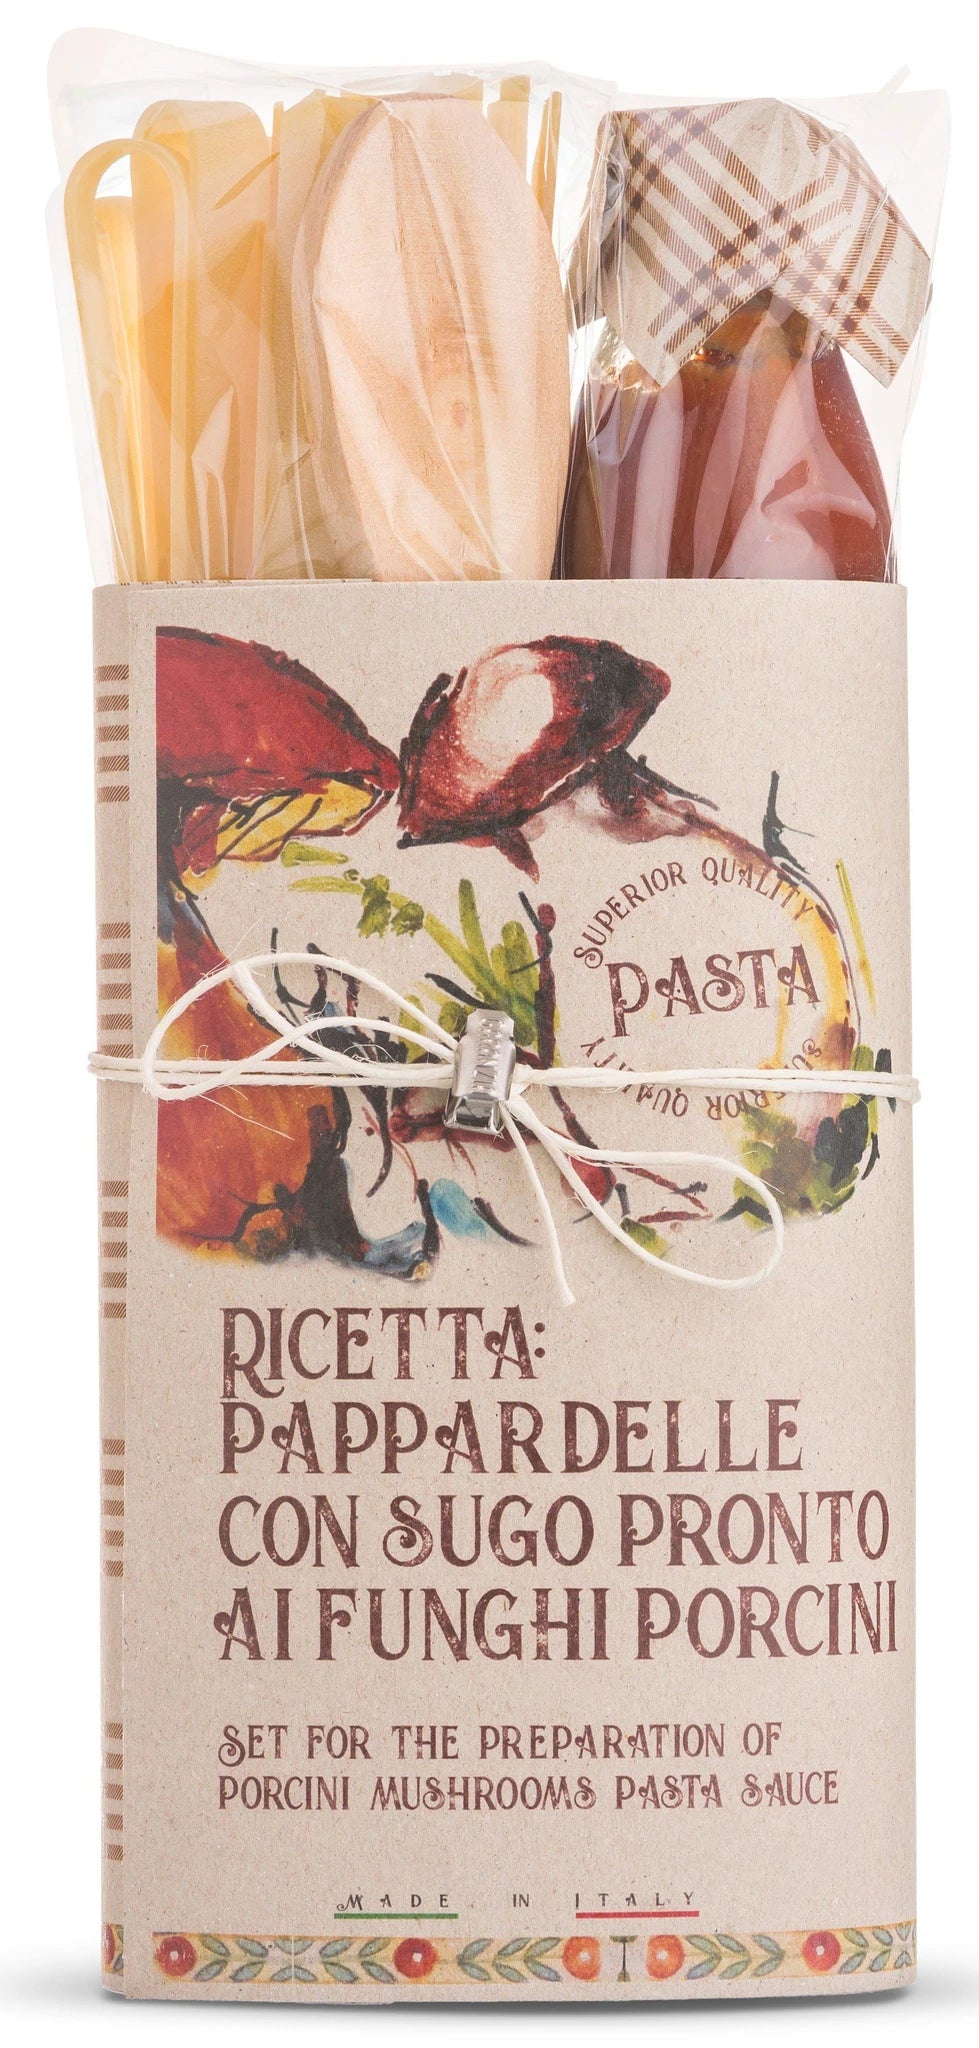 Organic Pappardelle with Porcini Mushroom Pasta sauce gift set with wooden spoon by 